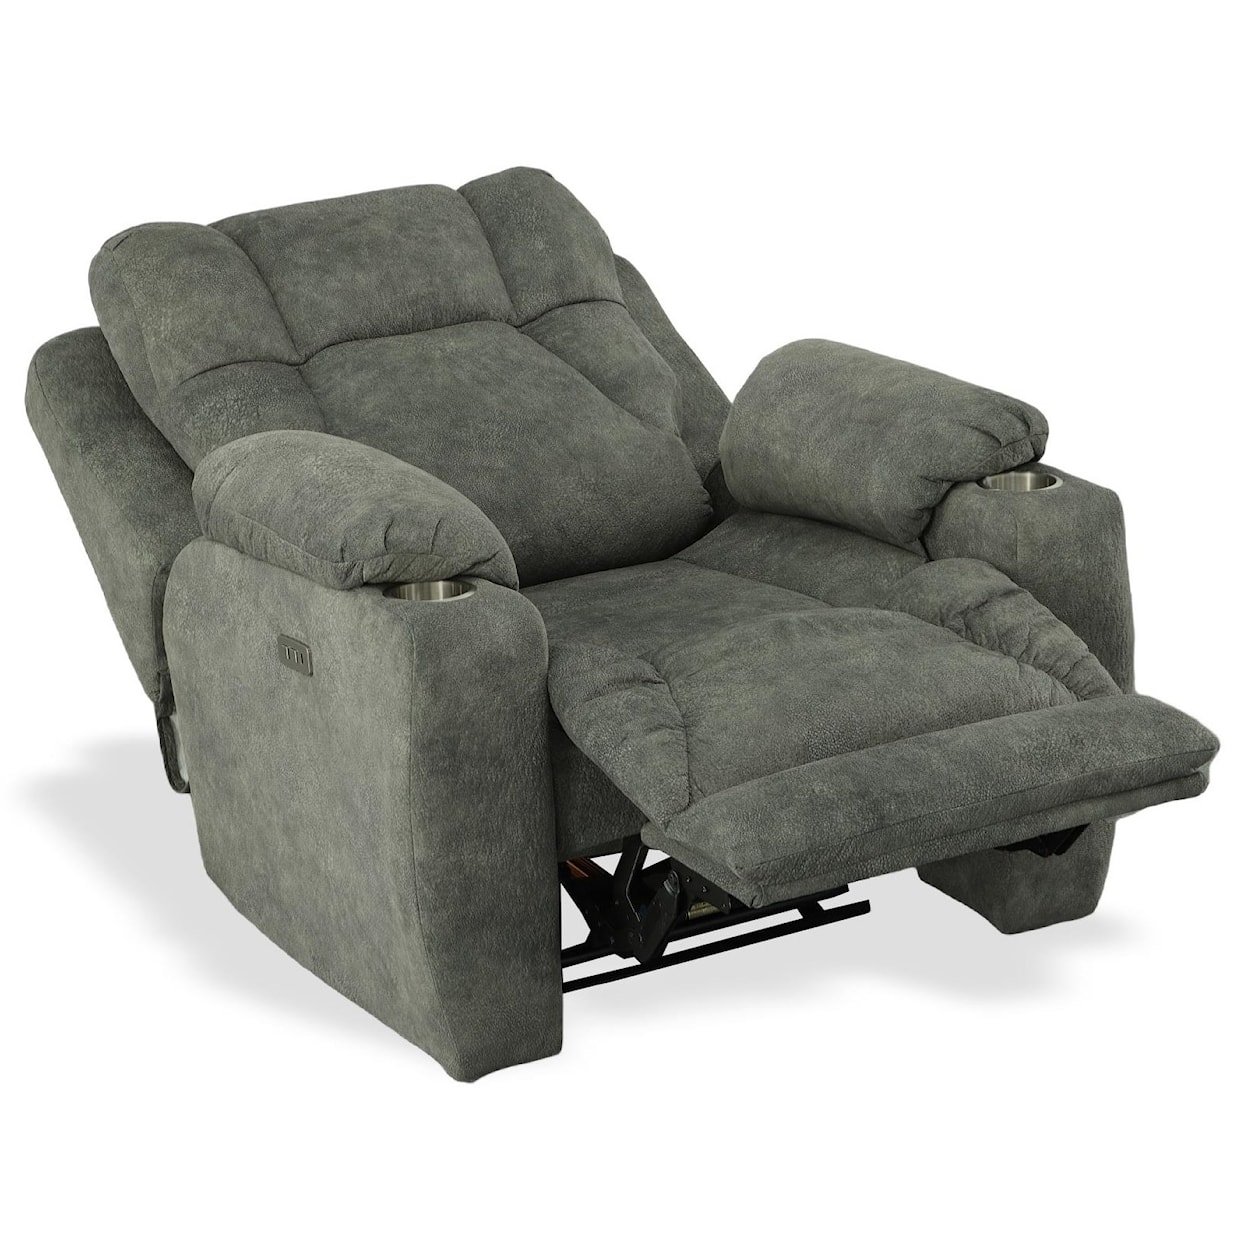 Southern Motion Challenger Big Man's Recliner